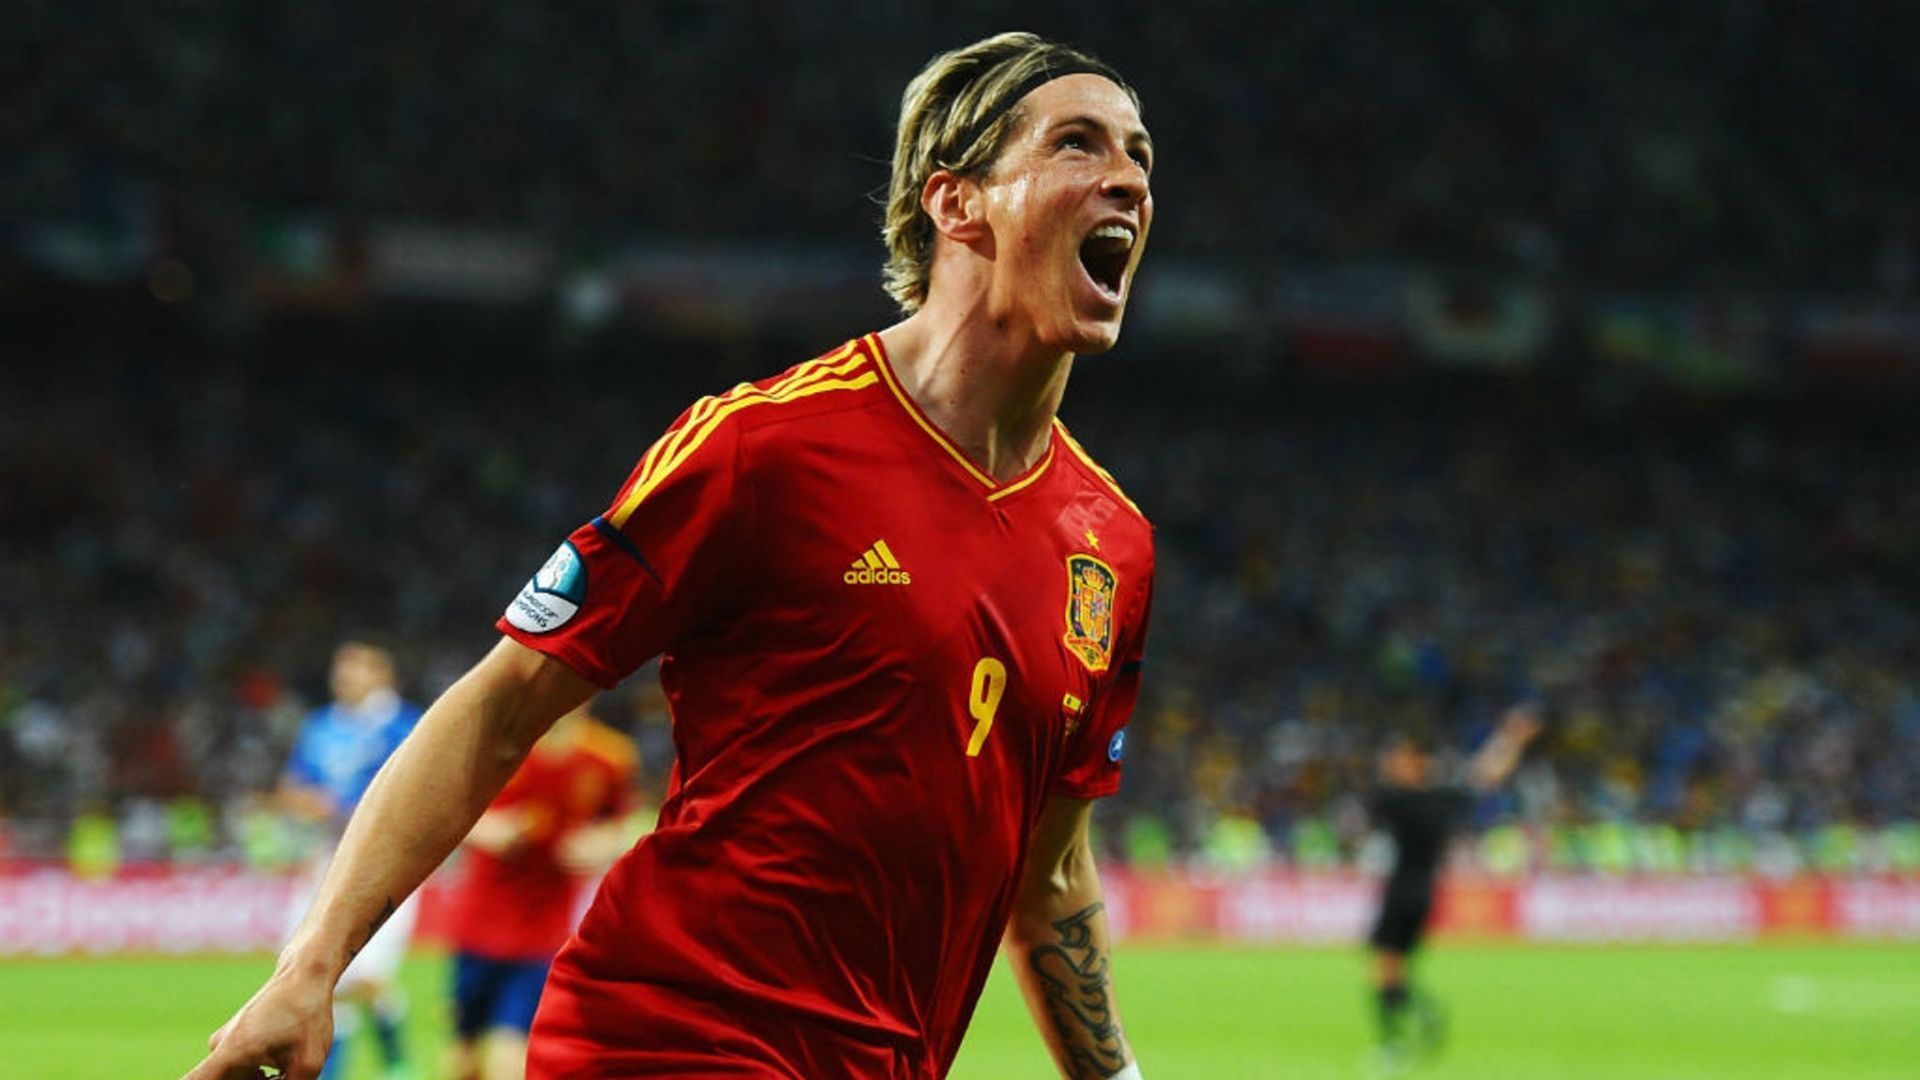 Fernando Torres was a striker who could give any defender nightmares on his day.